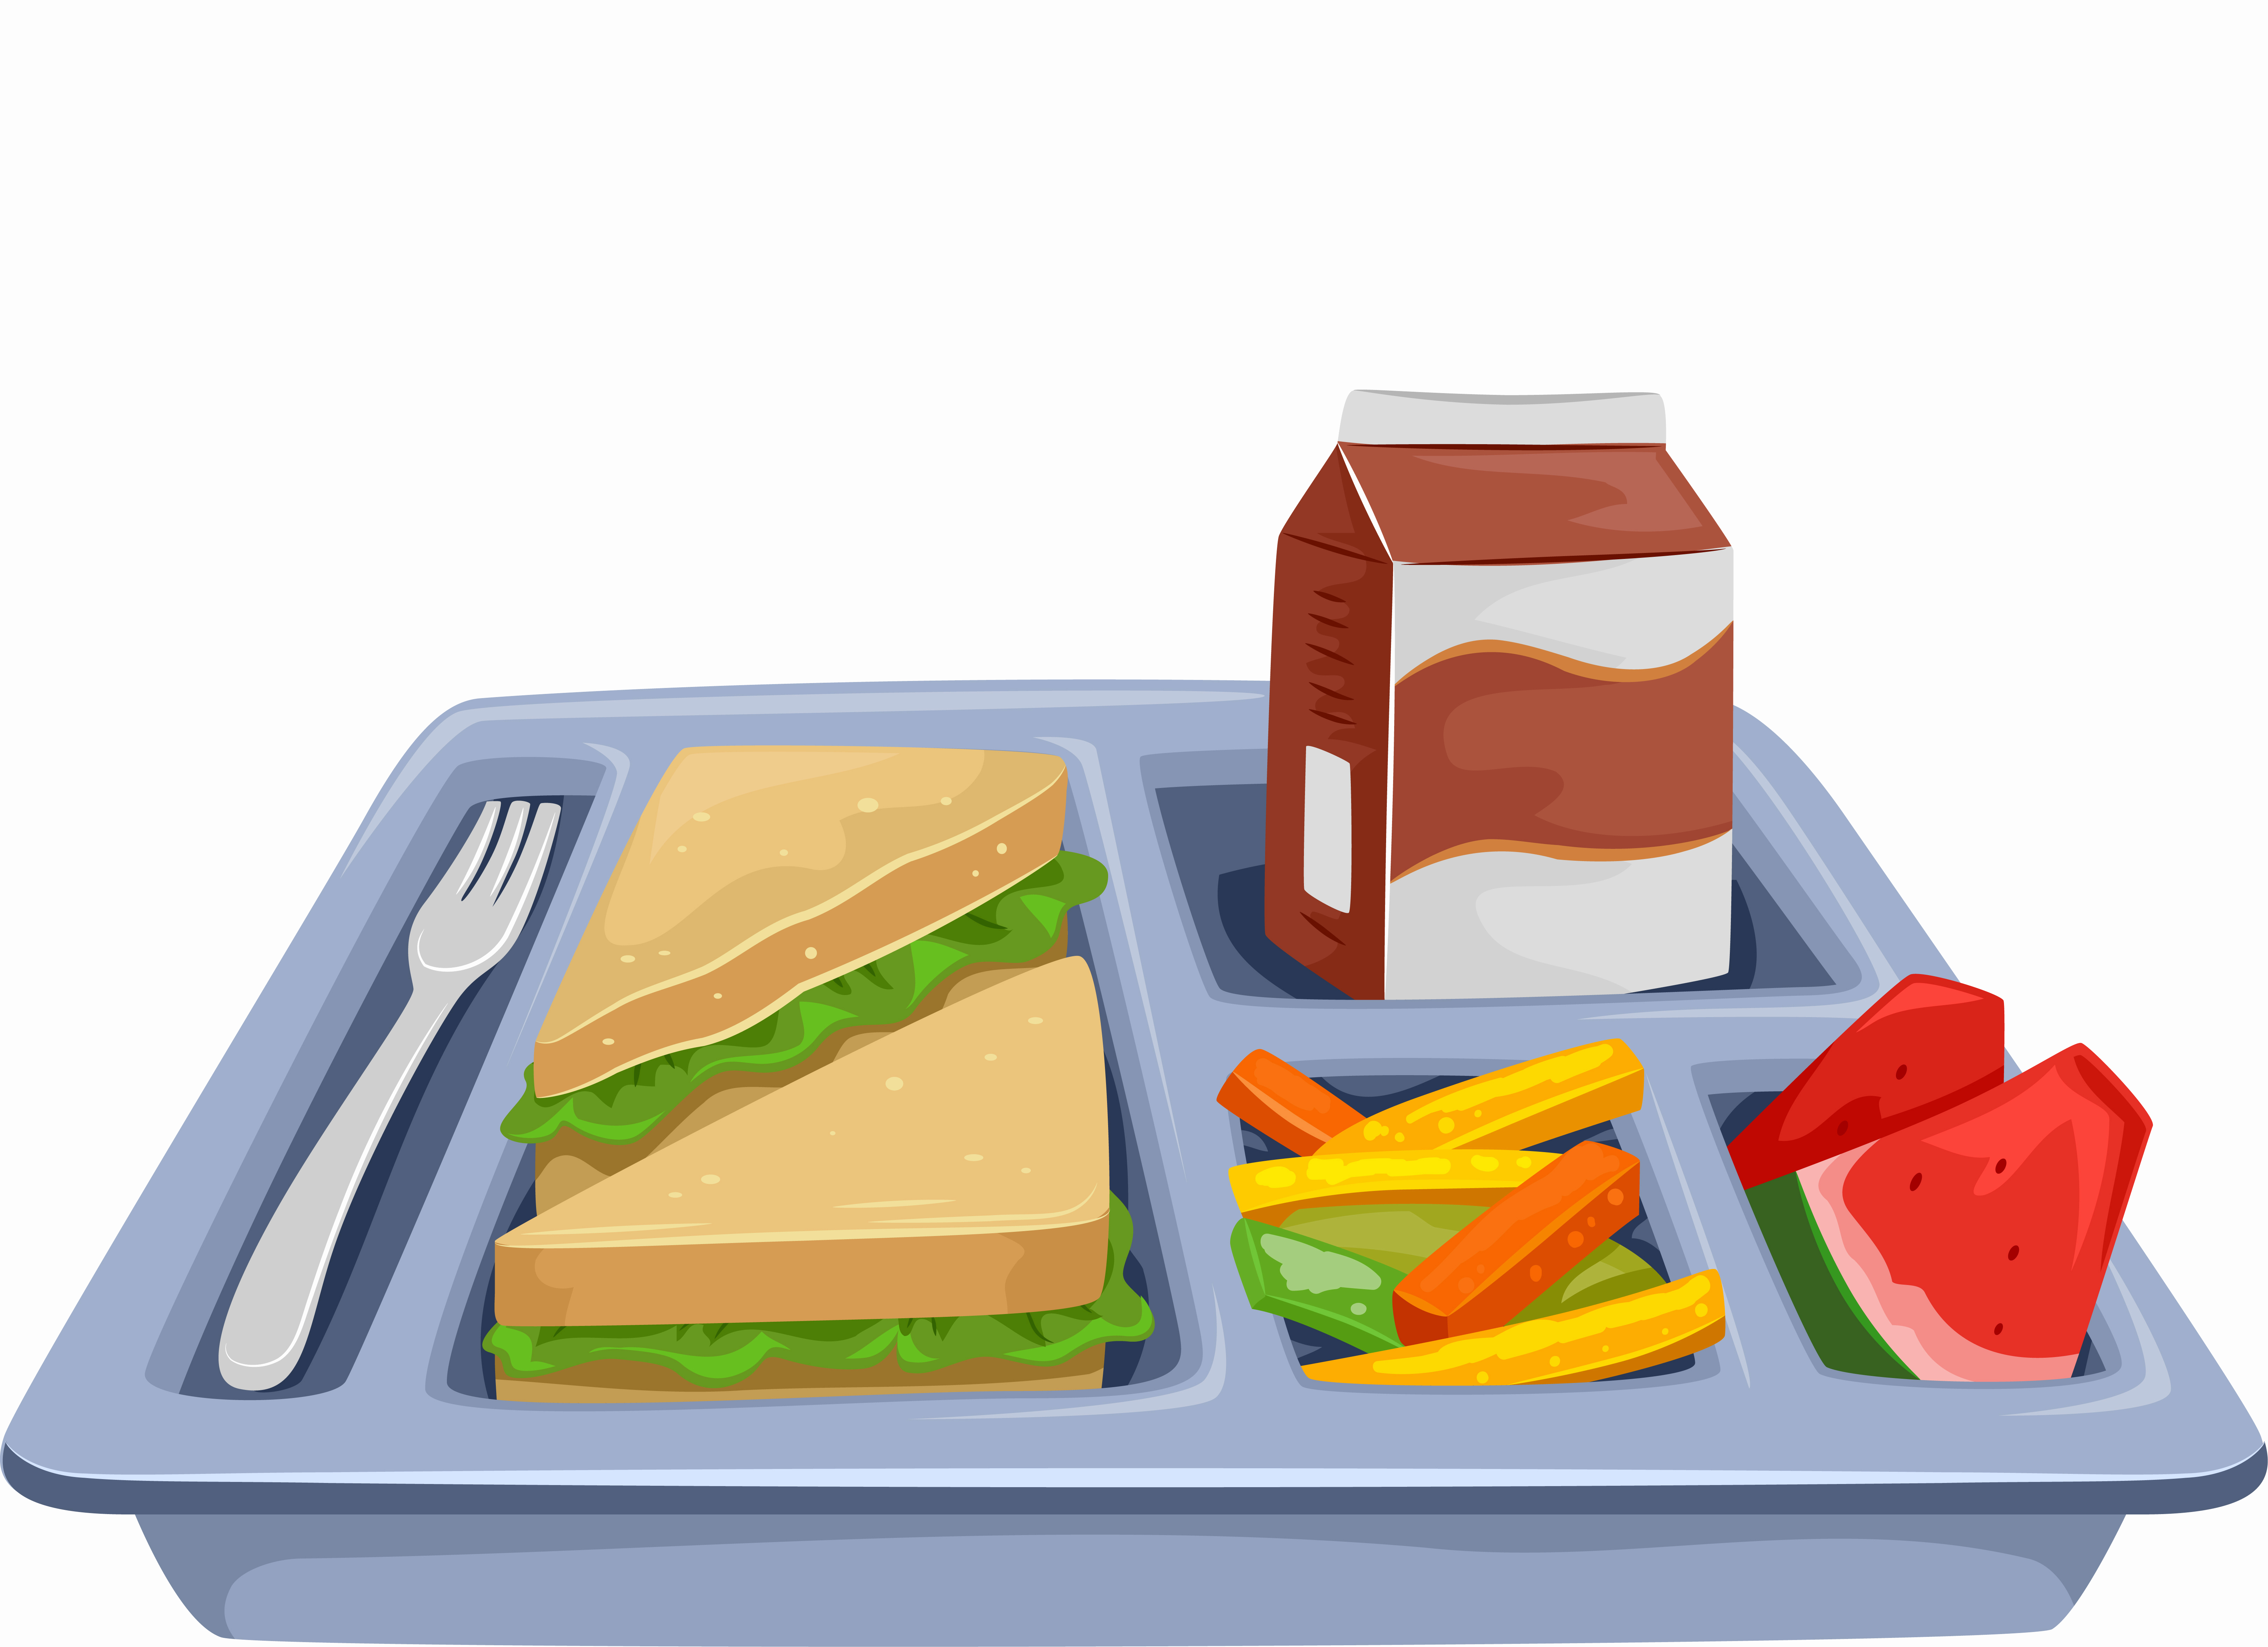 Lunch Tray Clipart Free Download Clip Art.